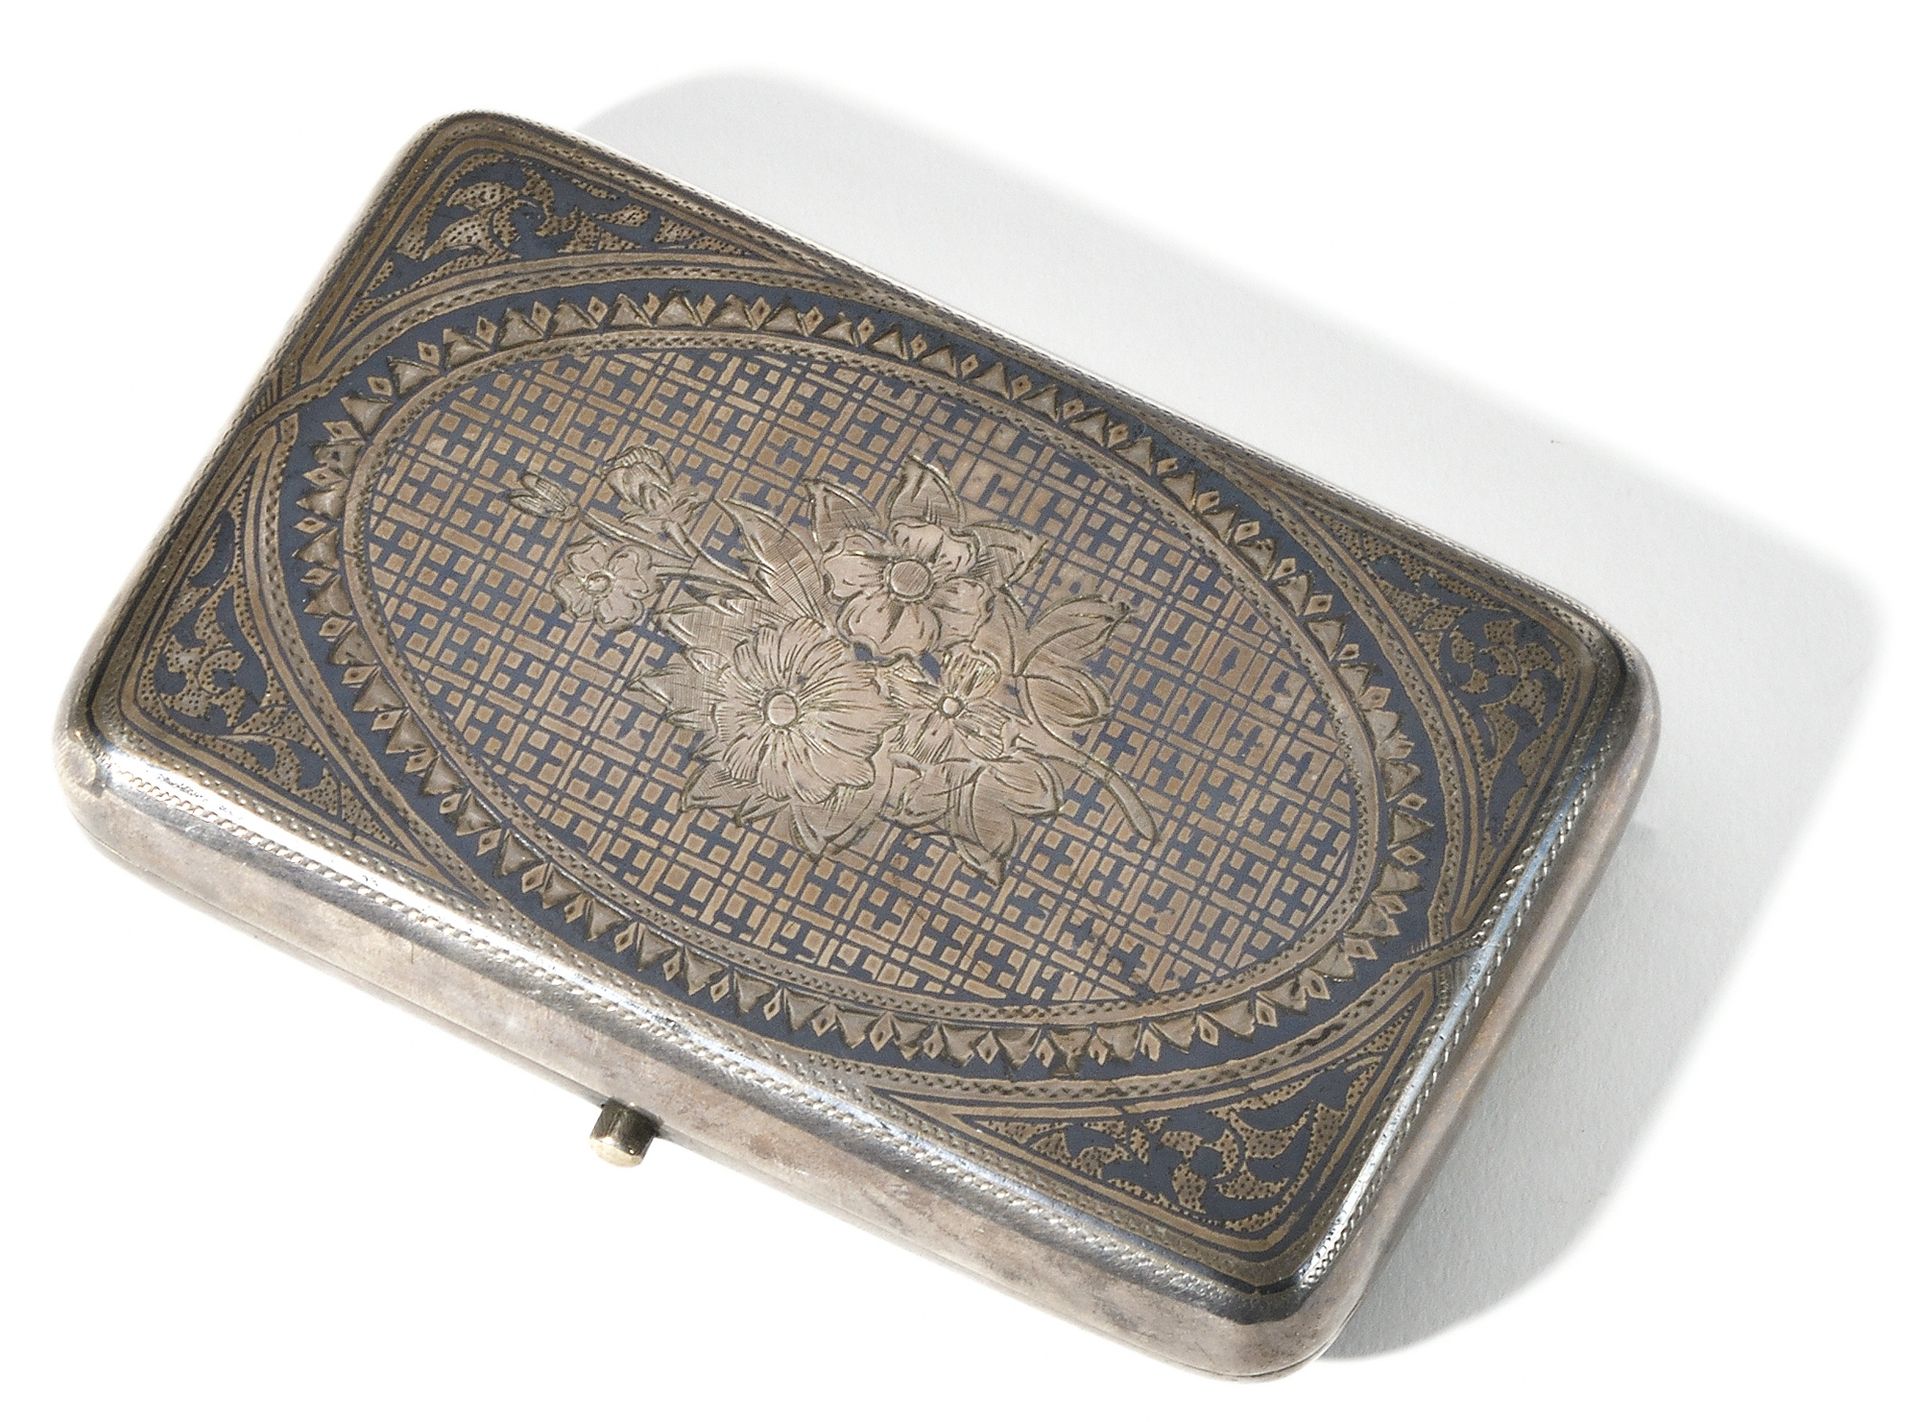 Null Cigarette case

Decorated with a floral motif

Silver, chern

Hallmarks: АС&hellip;